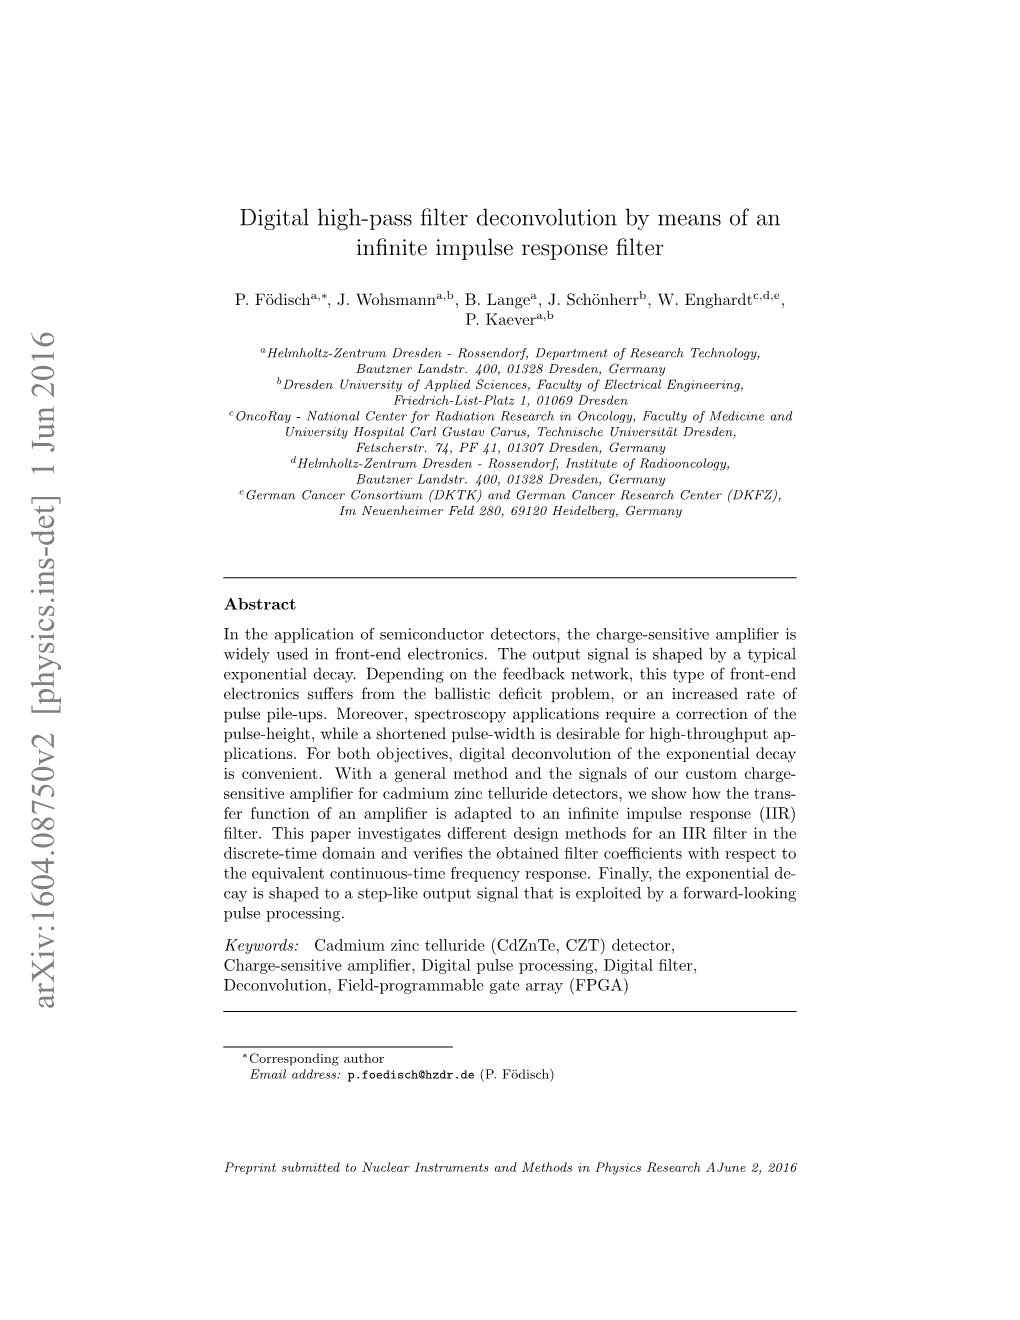 Digital High-Pass Filter Deconvolution by Means of an Infinite Impulse